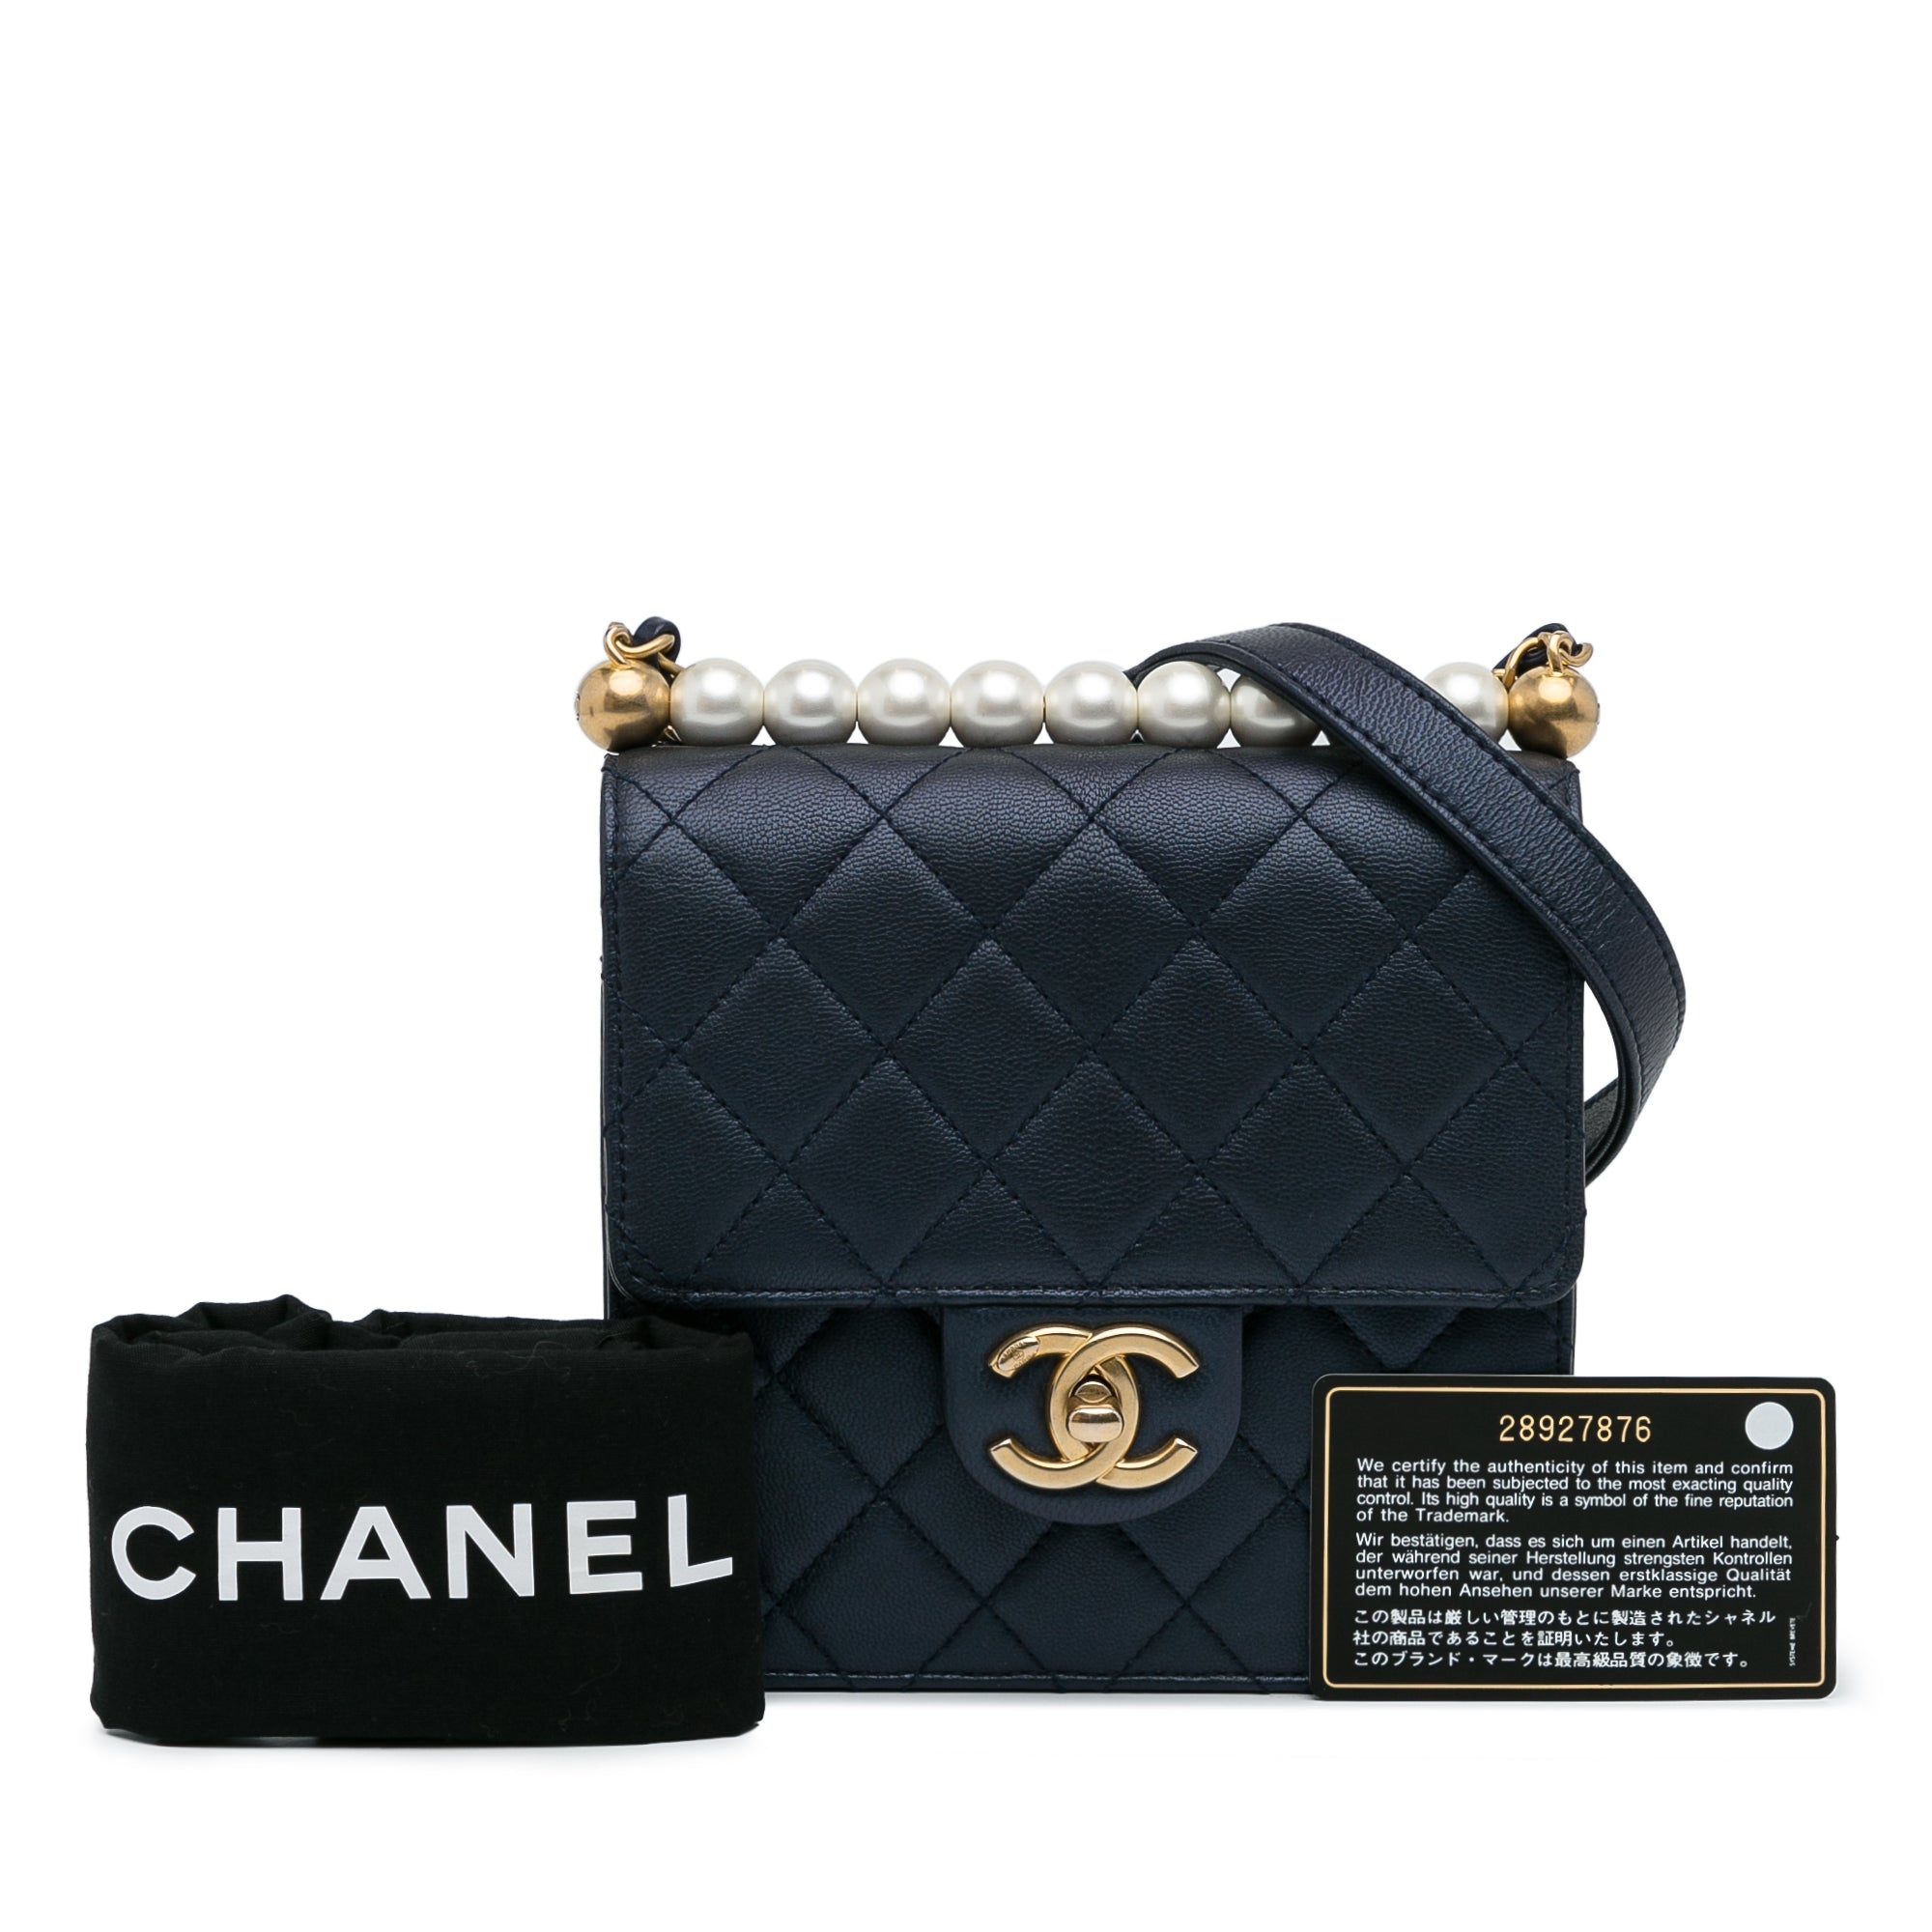 Blue Chanel Small Chic Pearls Flap Bag - Designer Revival